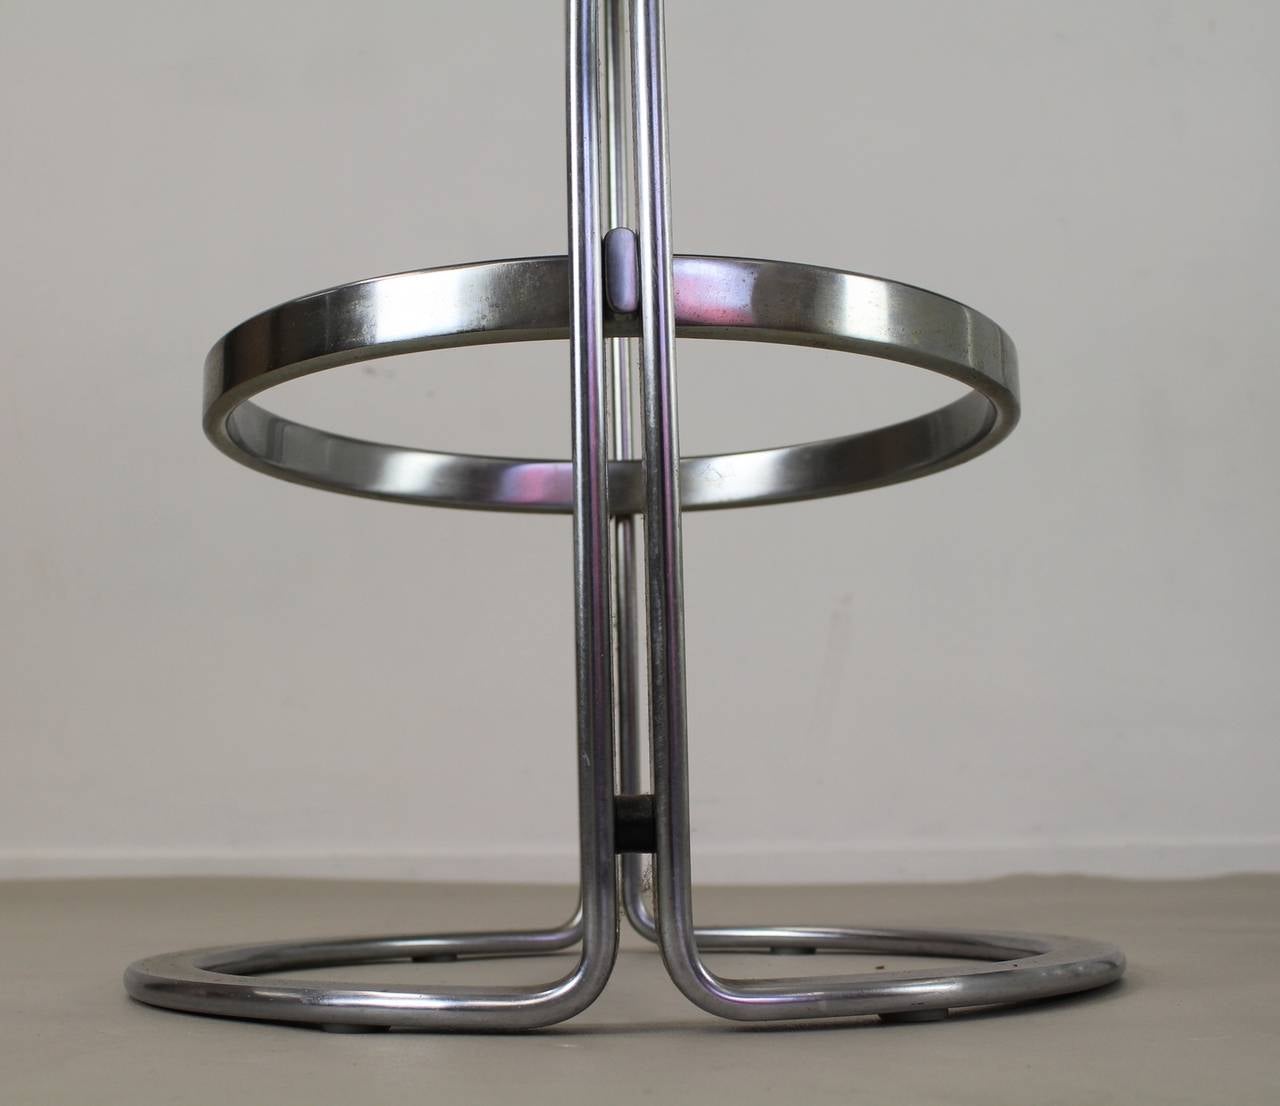 Two Scarce Kill International Chrome-Plated Steel Bar Stools by Horst Bruning In Good Condition For Sale In Staphorst, NL